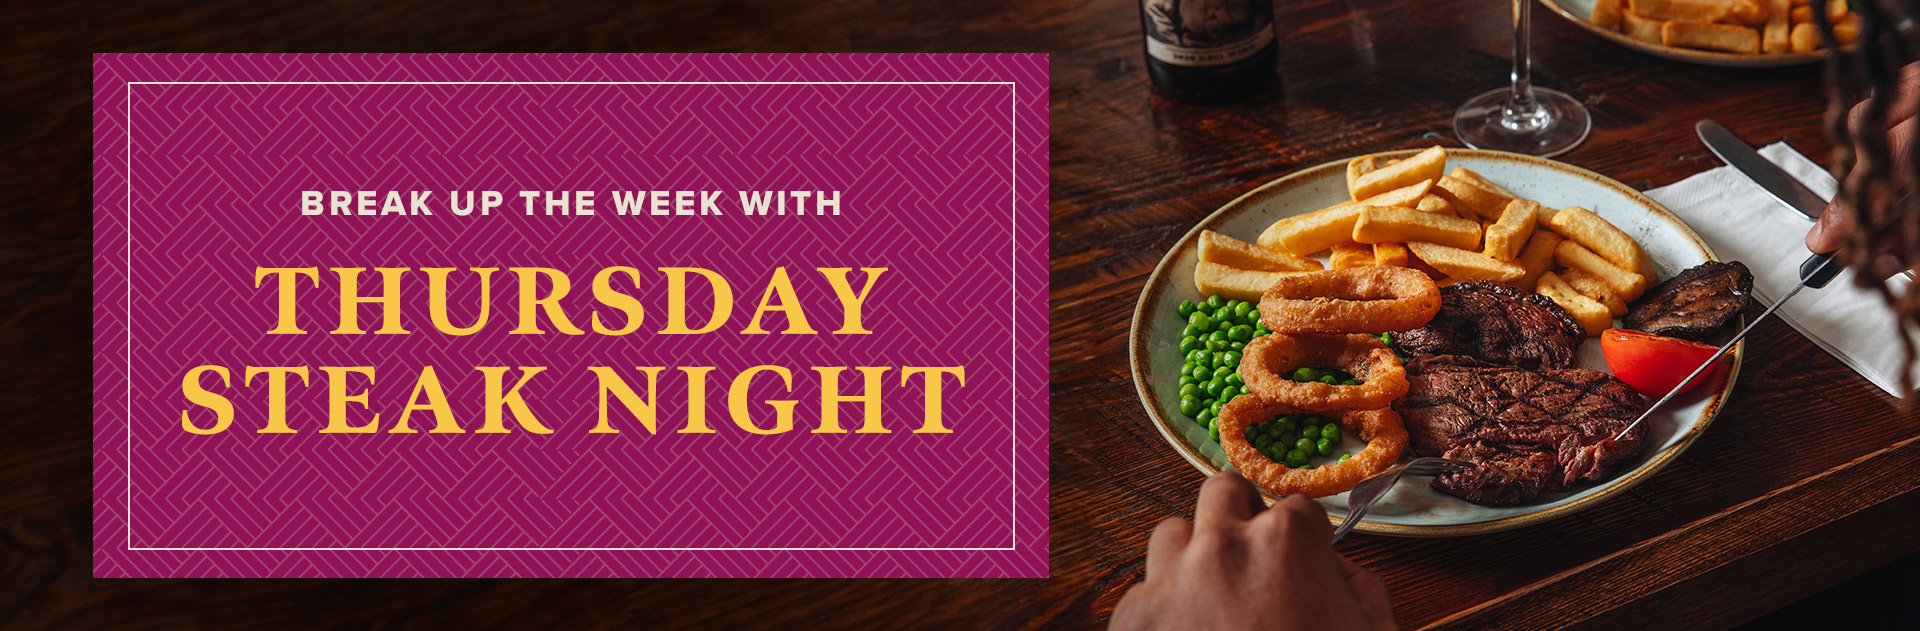 Thursday Steak Night at The Hind